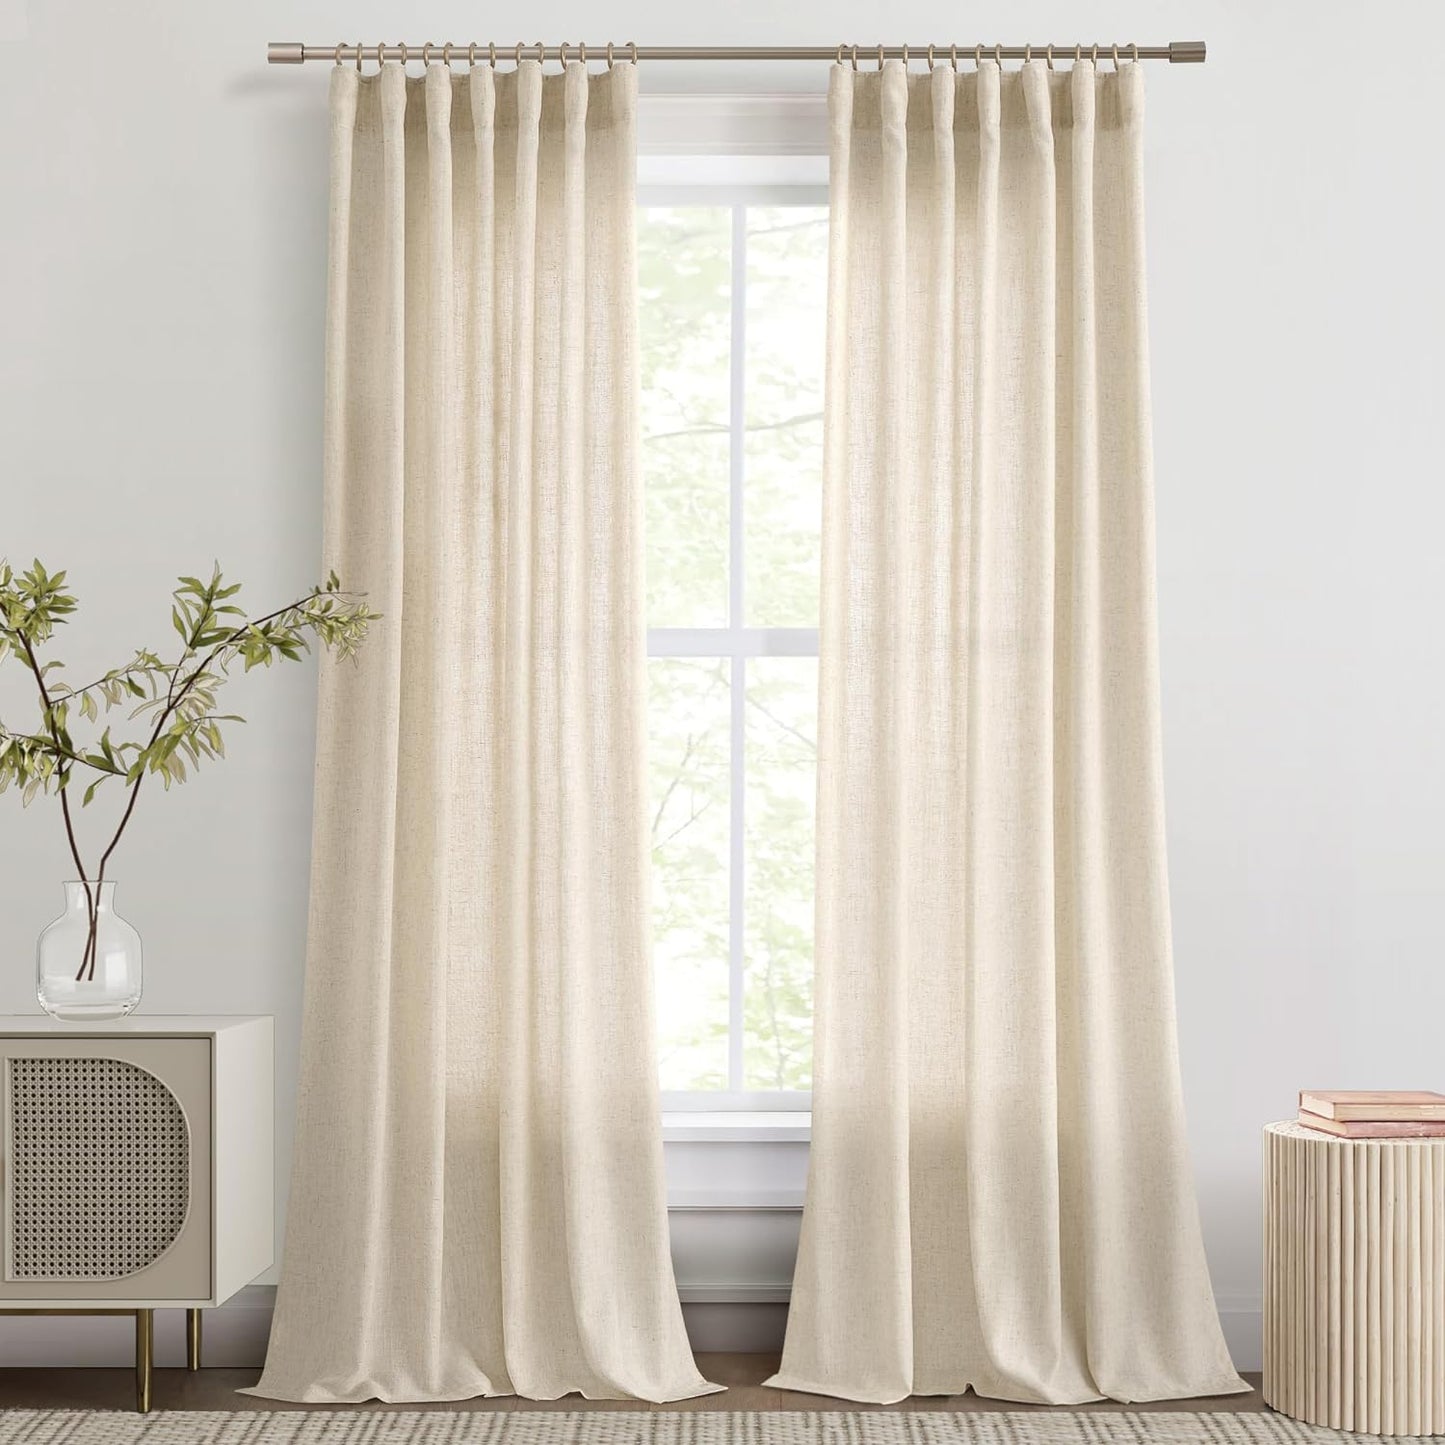 Joywell Natural Linen Cream Curtains 84 Inches Long for Living Room Bedroom Hook Belt Back Tab Pinch Pleated Light Filtering Ivory White Neutral Boho Modern Farmhouse Linen Drapes 84 Length 2 Panels  Joywell Sand Beige 52W X 120L Inch X 2 Panels 